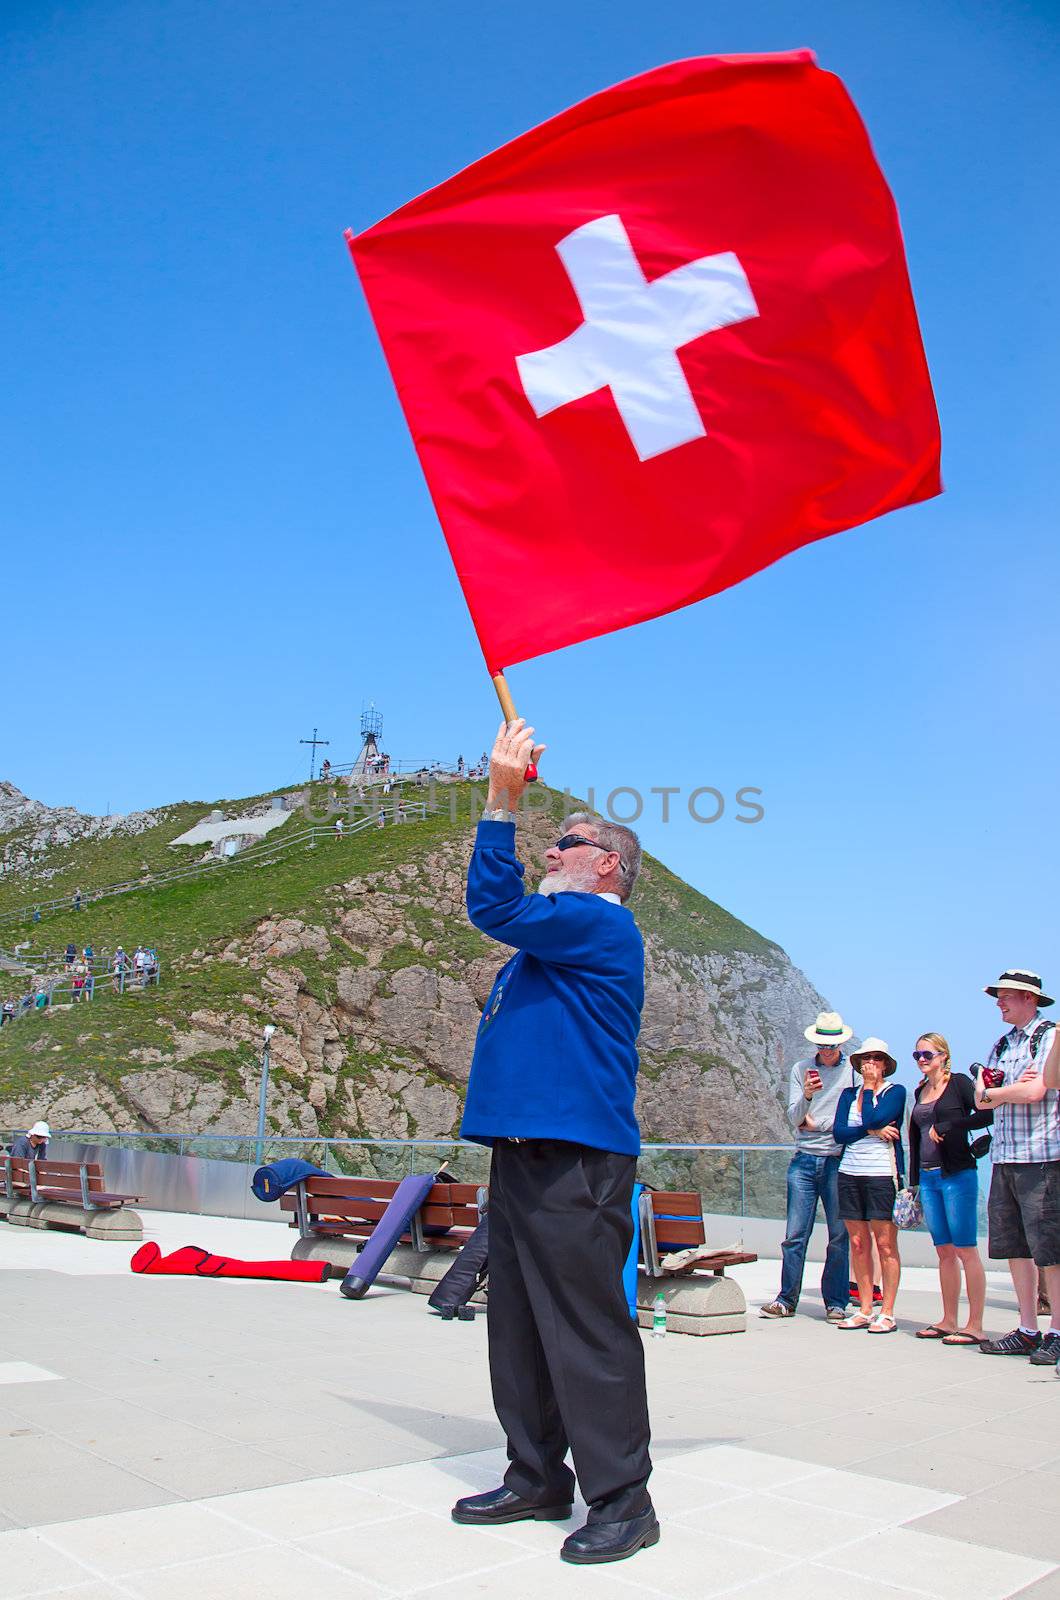 MOUNT PILATUS - JULY 13: Unidentified man demonstrating traditional swiss "flag throwing" on July 13, 2013 on the top of mount Pilatus, Switzerland. Flag twirling is one of the oldest national sports of Switzerland.